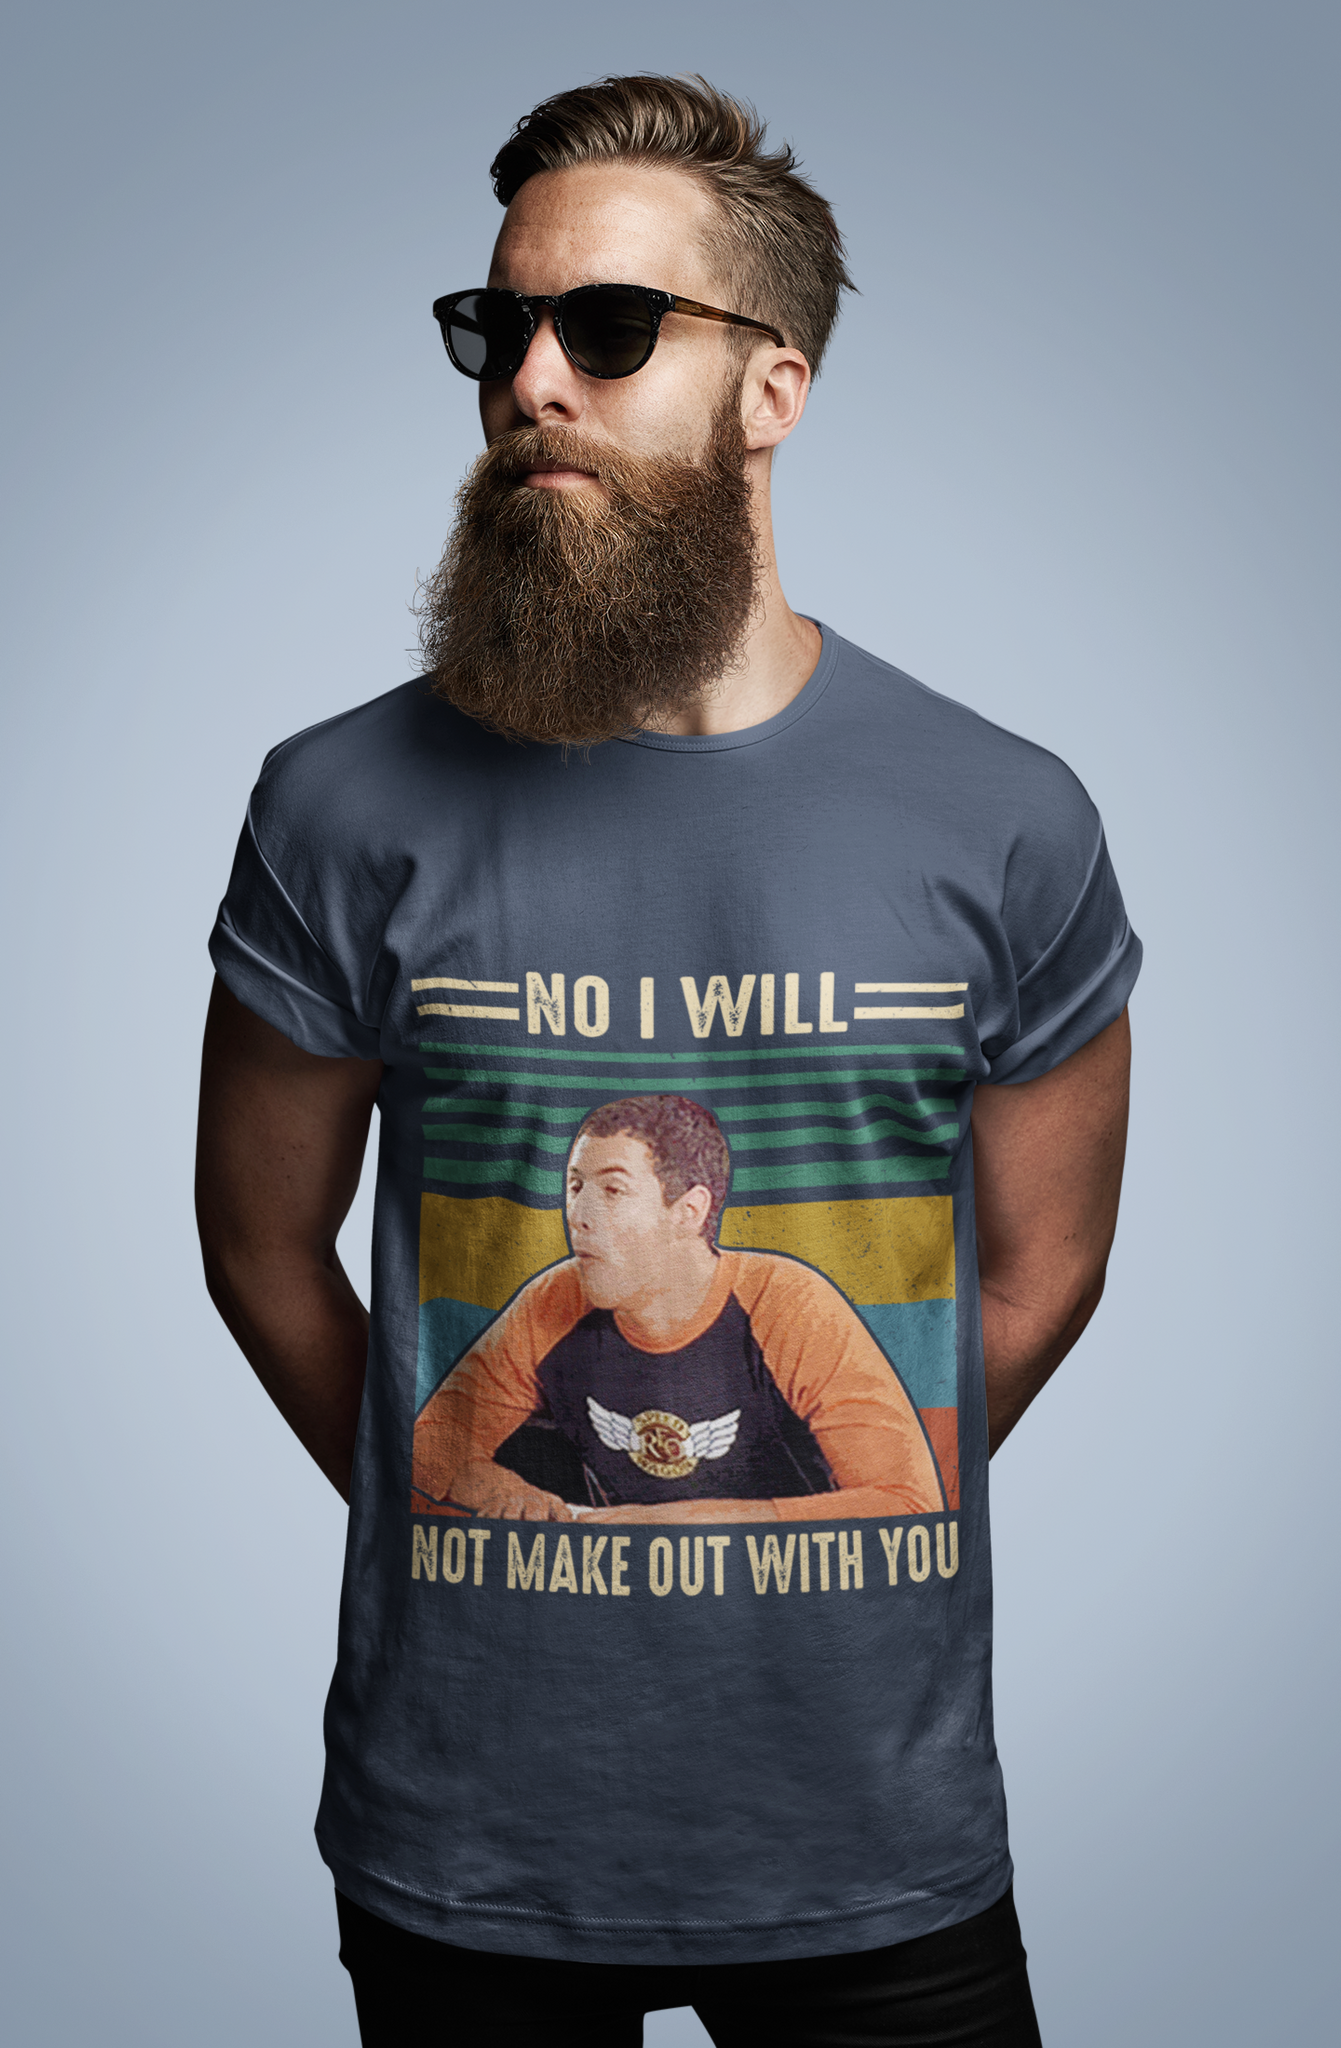 Billy Madison Comedy Film T Shirt, Billy Madison T Shirt, No I Will Not Make Out With You Tshirt